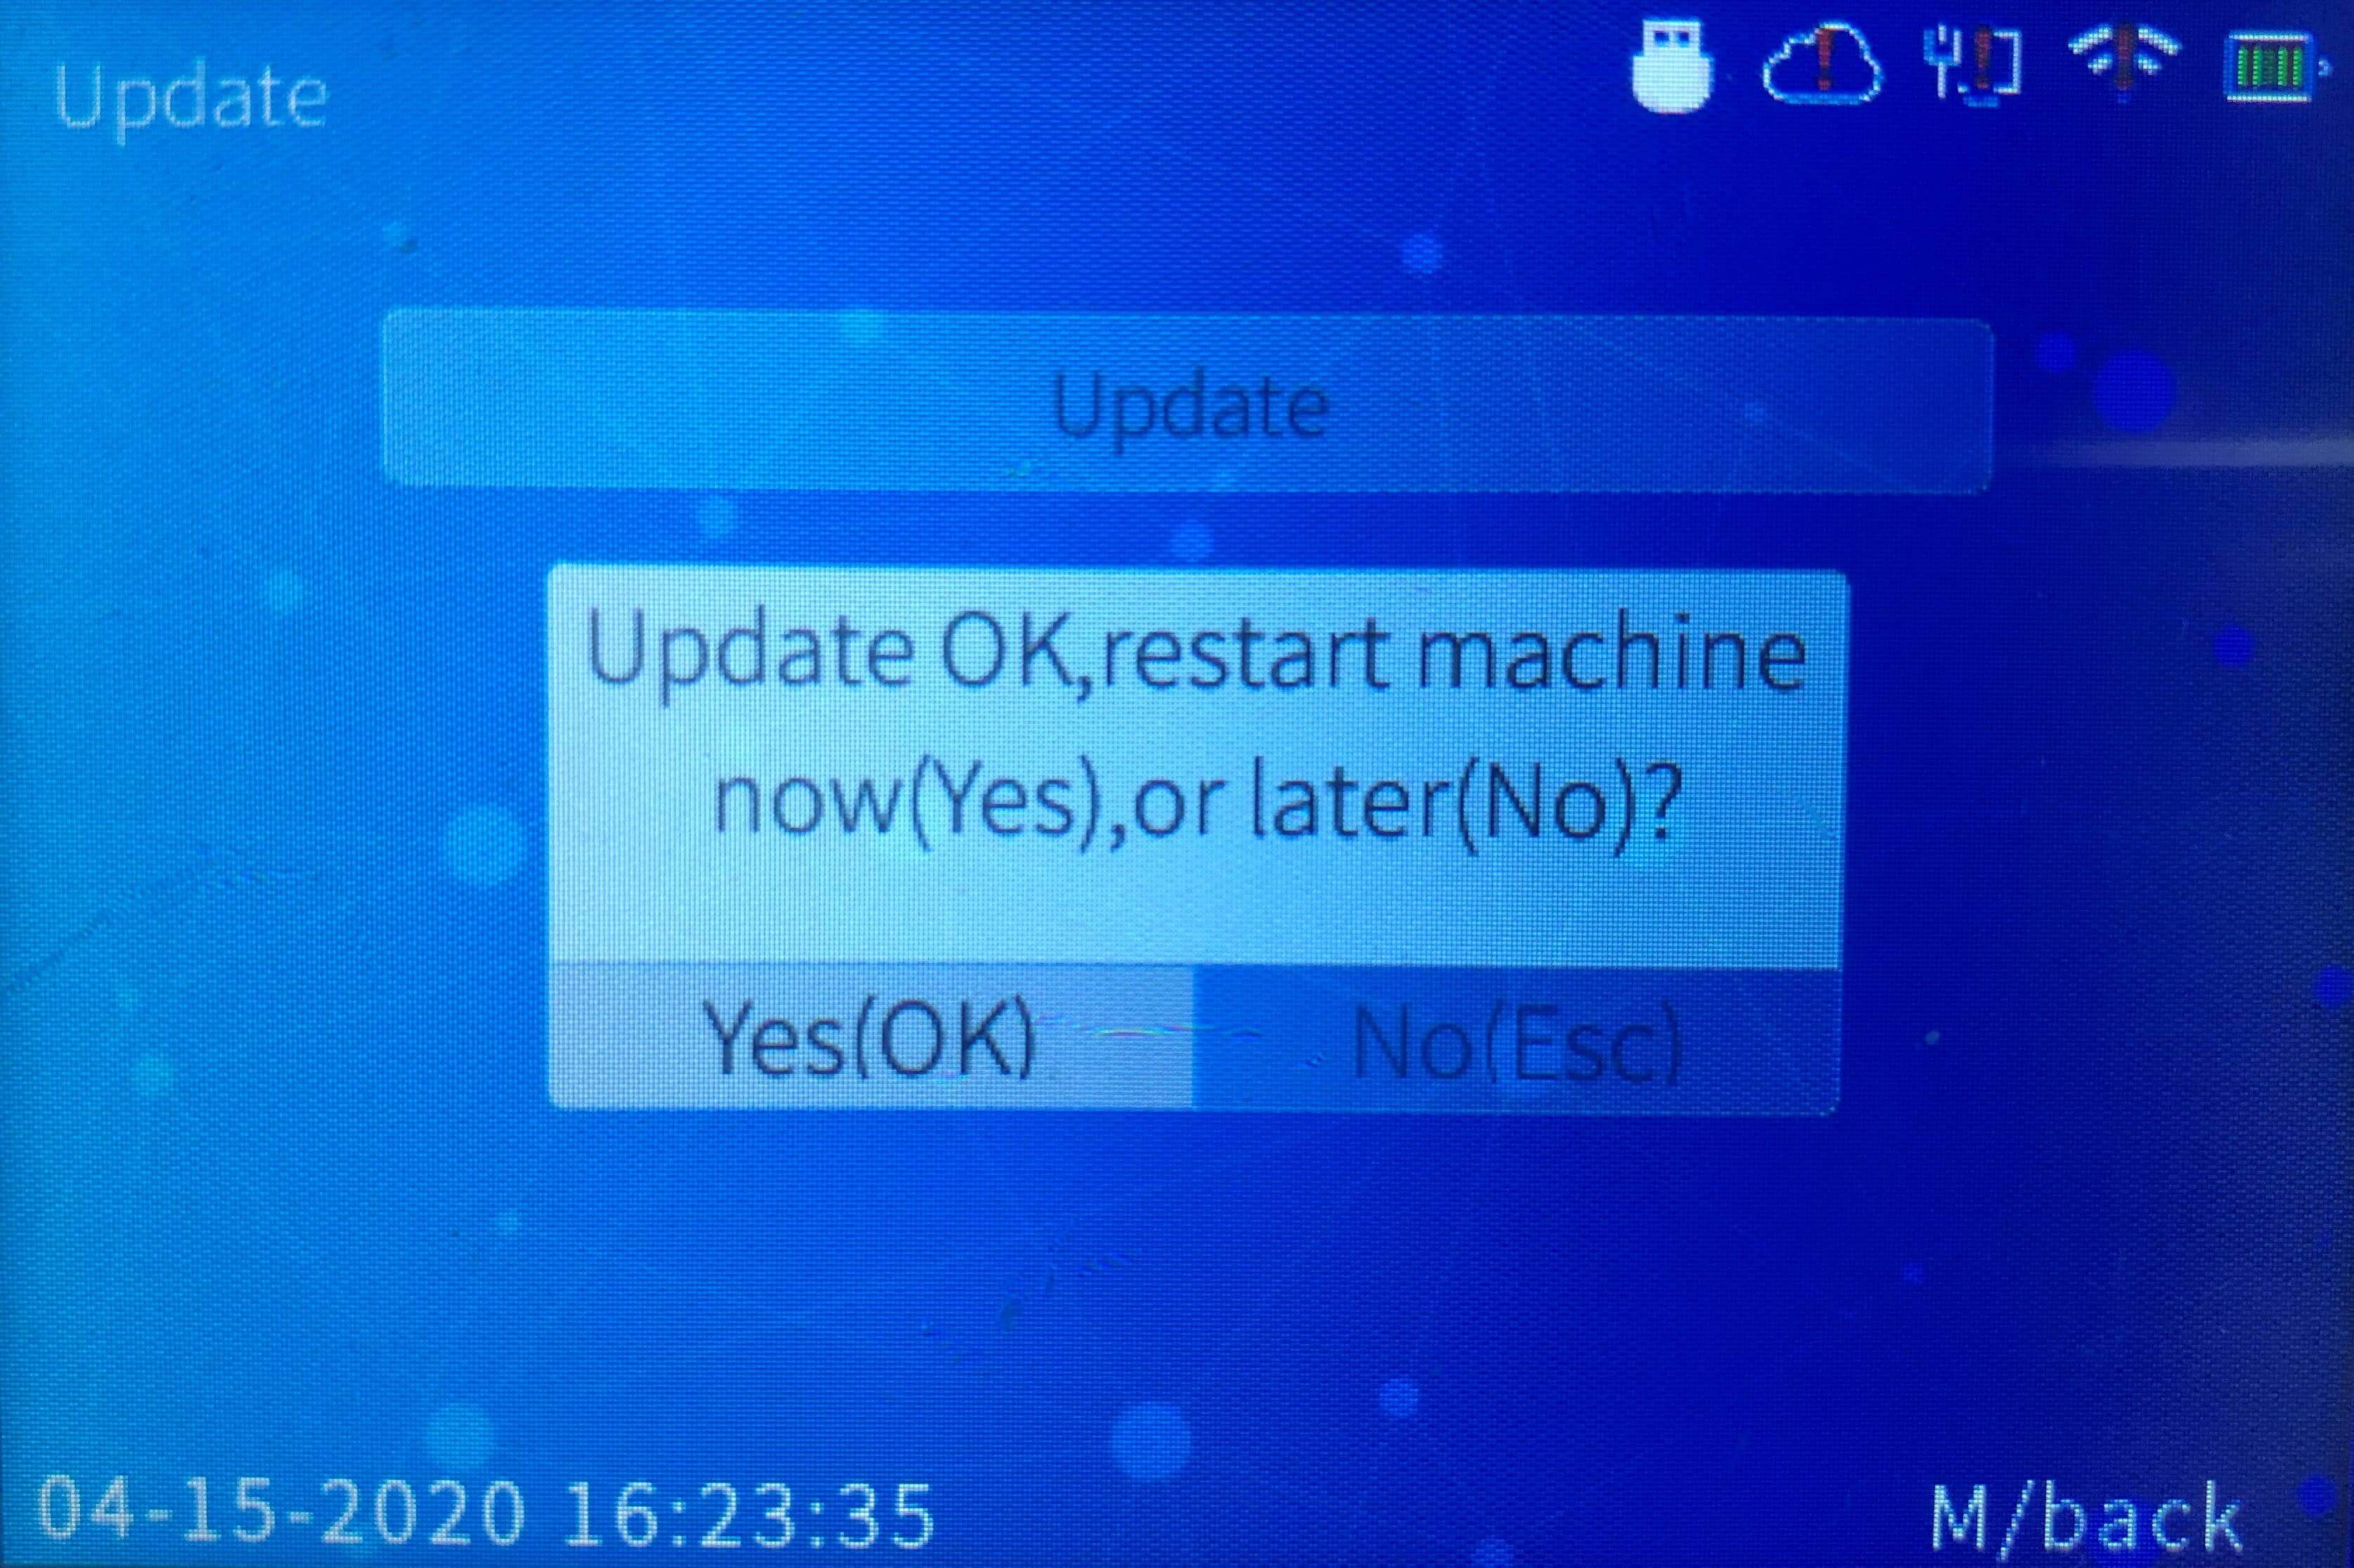 the device will restart once to complete the update